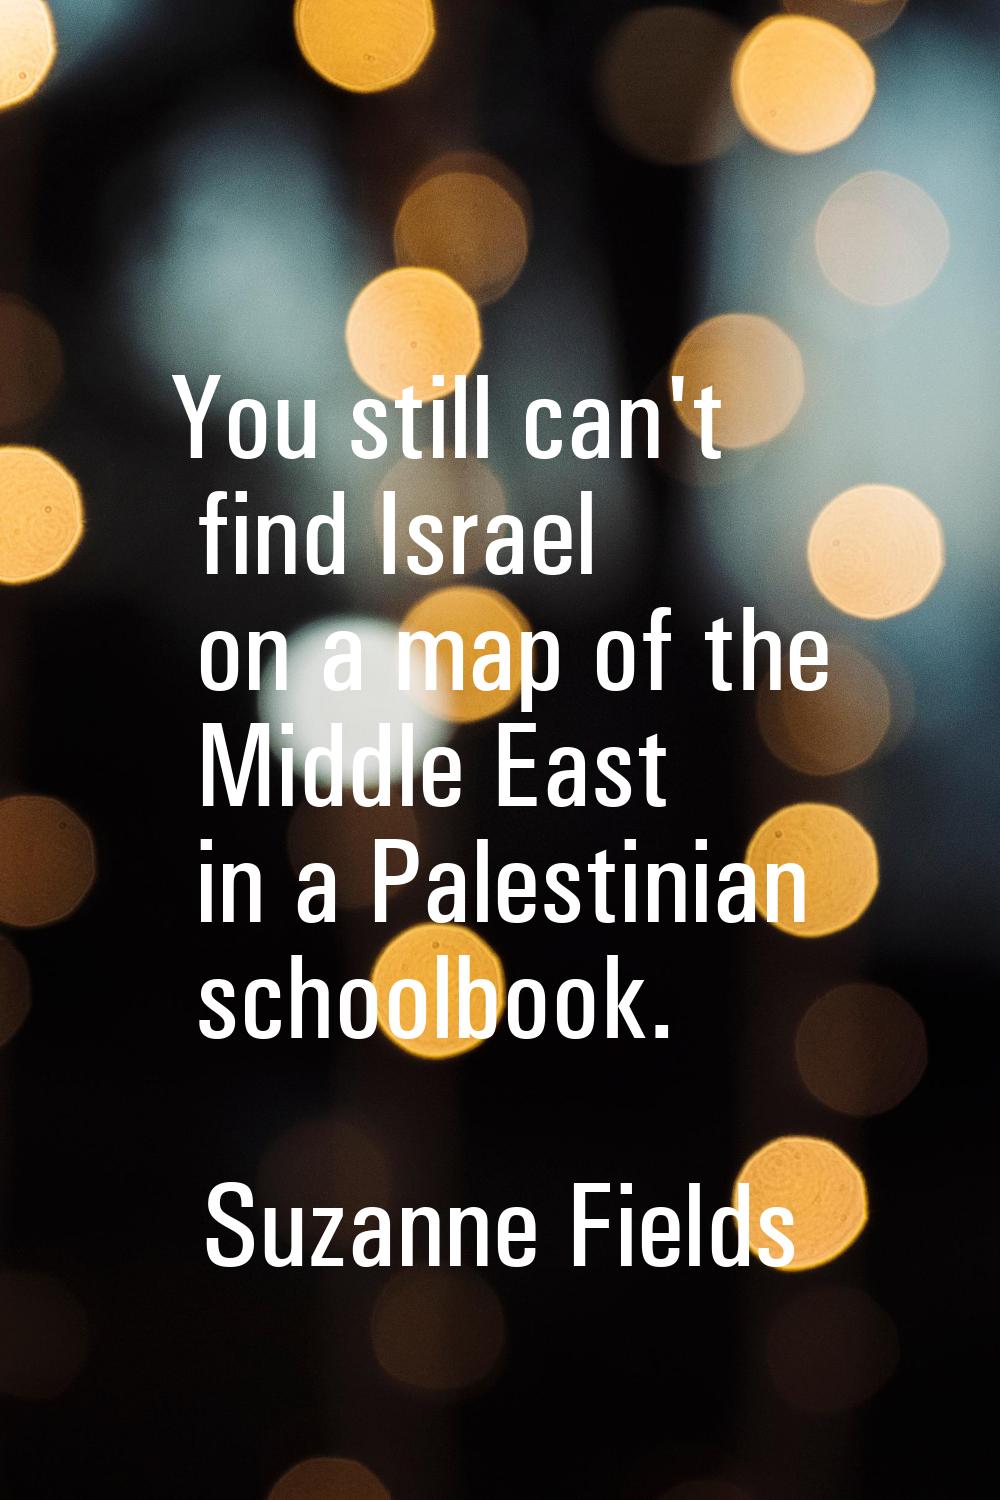 You still can't find Israel on a map of the Middle East in a Palestinian schoolbook.